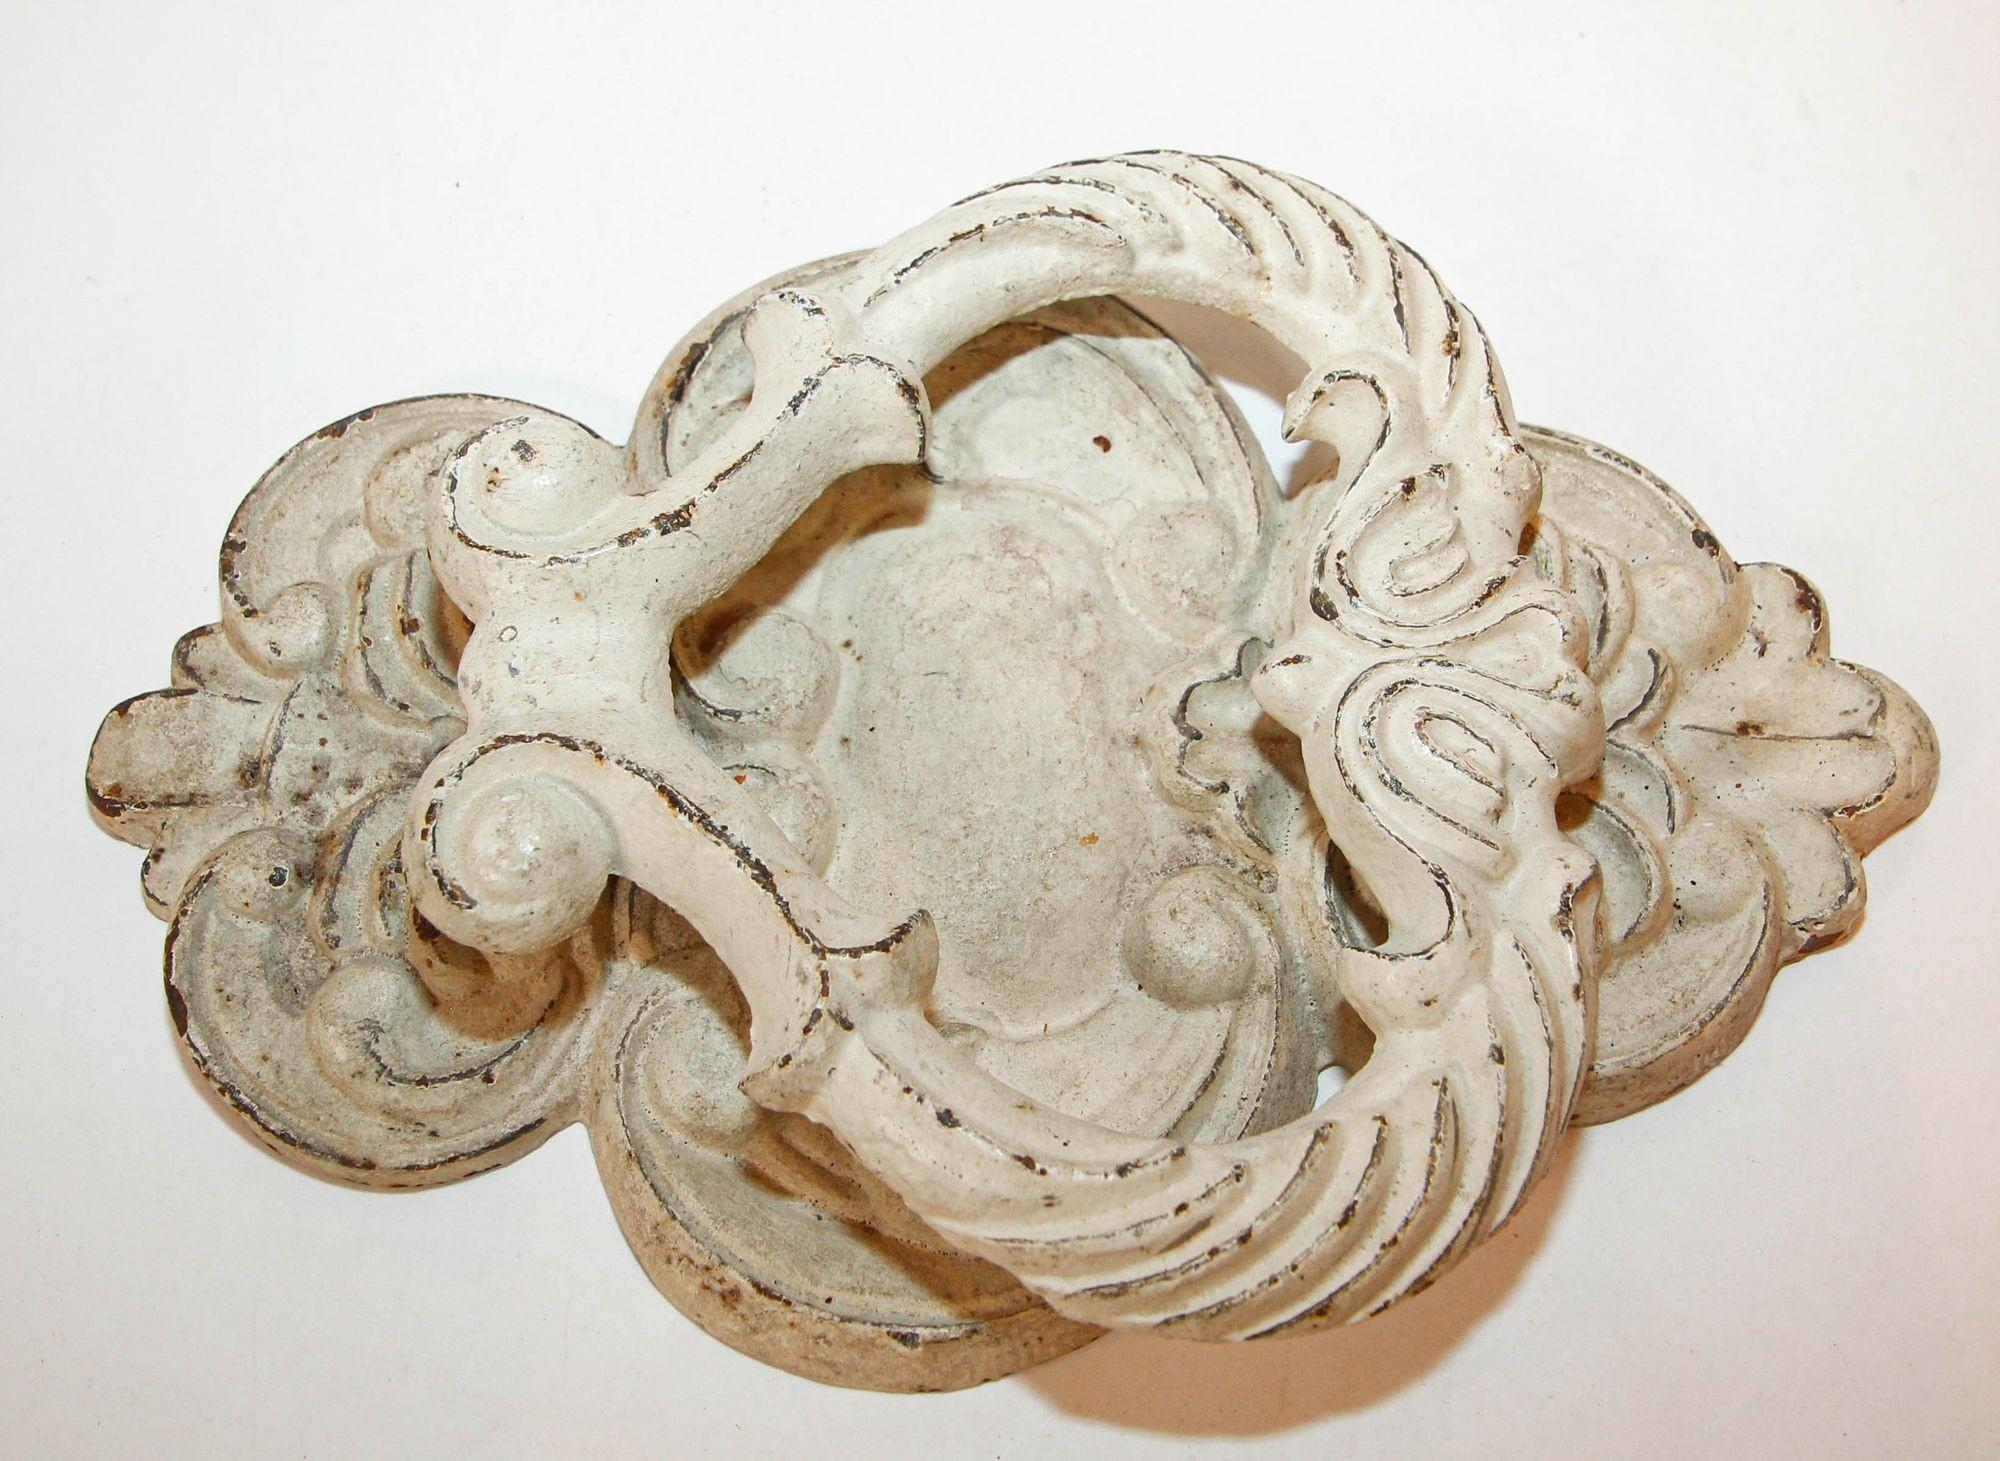 Italian Antique White Cast Iron Door Knocker.
Large antique ornate white metal cast iron, shabby chic Italian style.
Large and heavy 1940s very ornate Rococo style cast iron large door knocker.
Dimensions: 10.25 in. H. x 6.75 in.W. X 1.5 in.D.